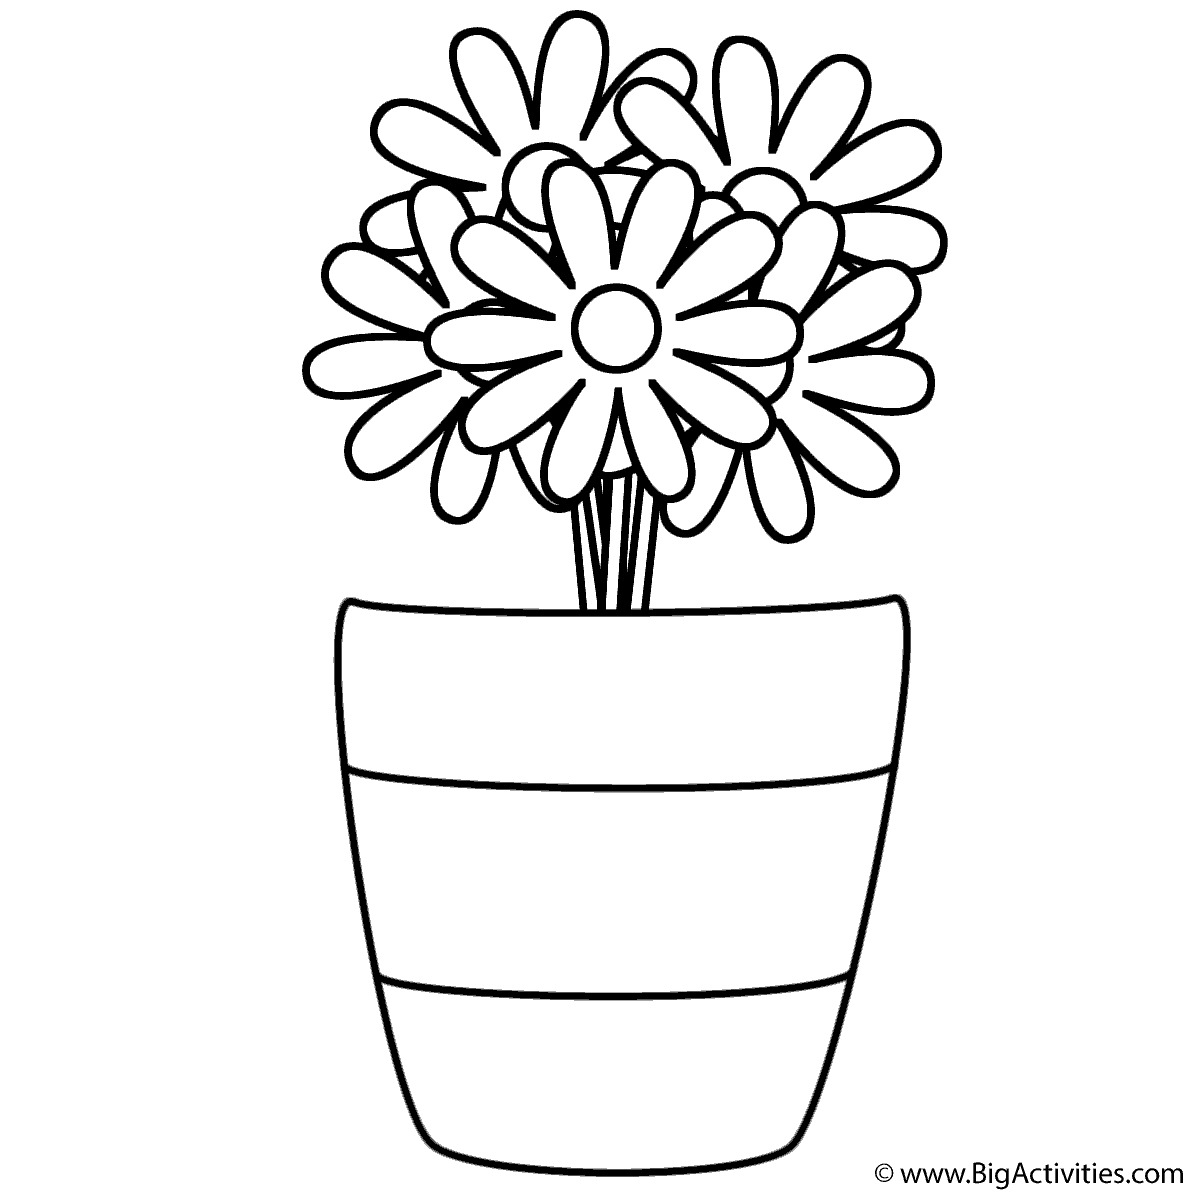 flowers-in-vase-with-stripes-coloring-page-mother-s-day